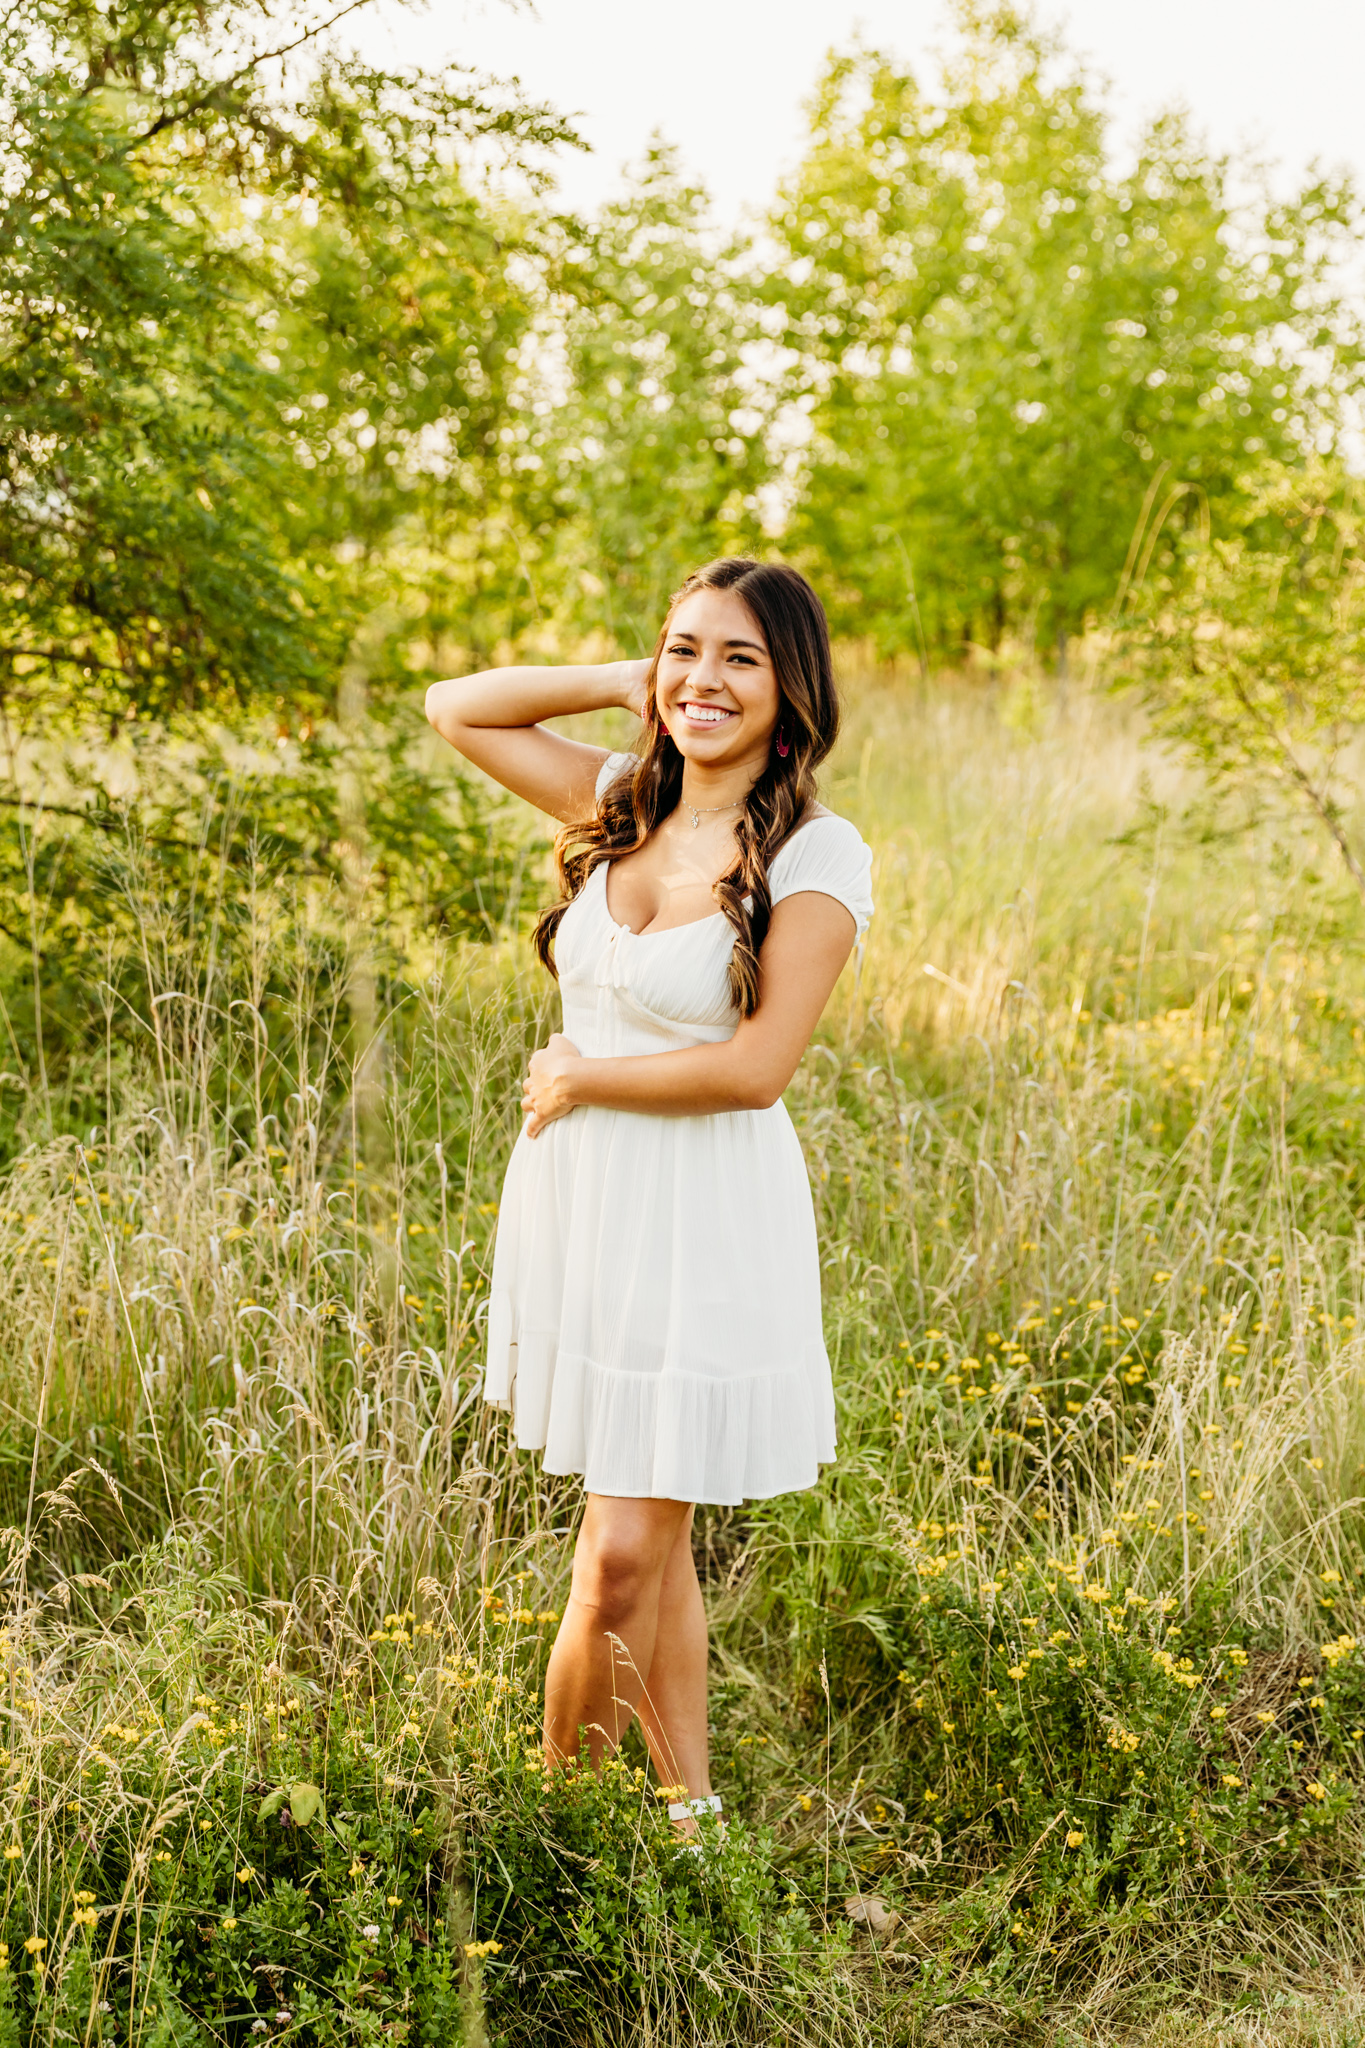 teenage girl in a short white dress standing in a field with a hand in her hair and the other across her body as she laughs